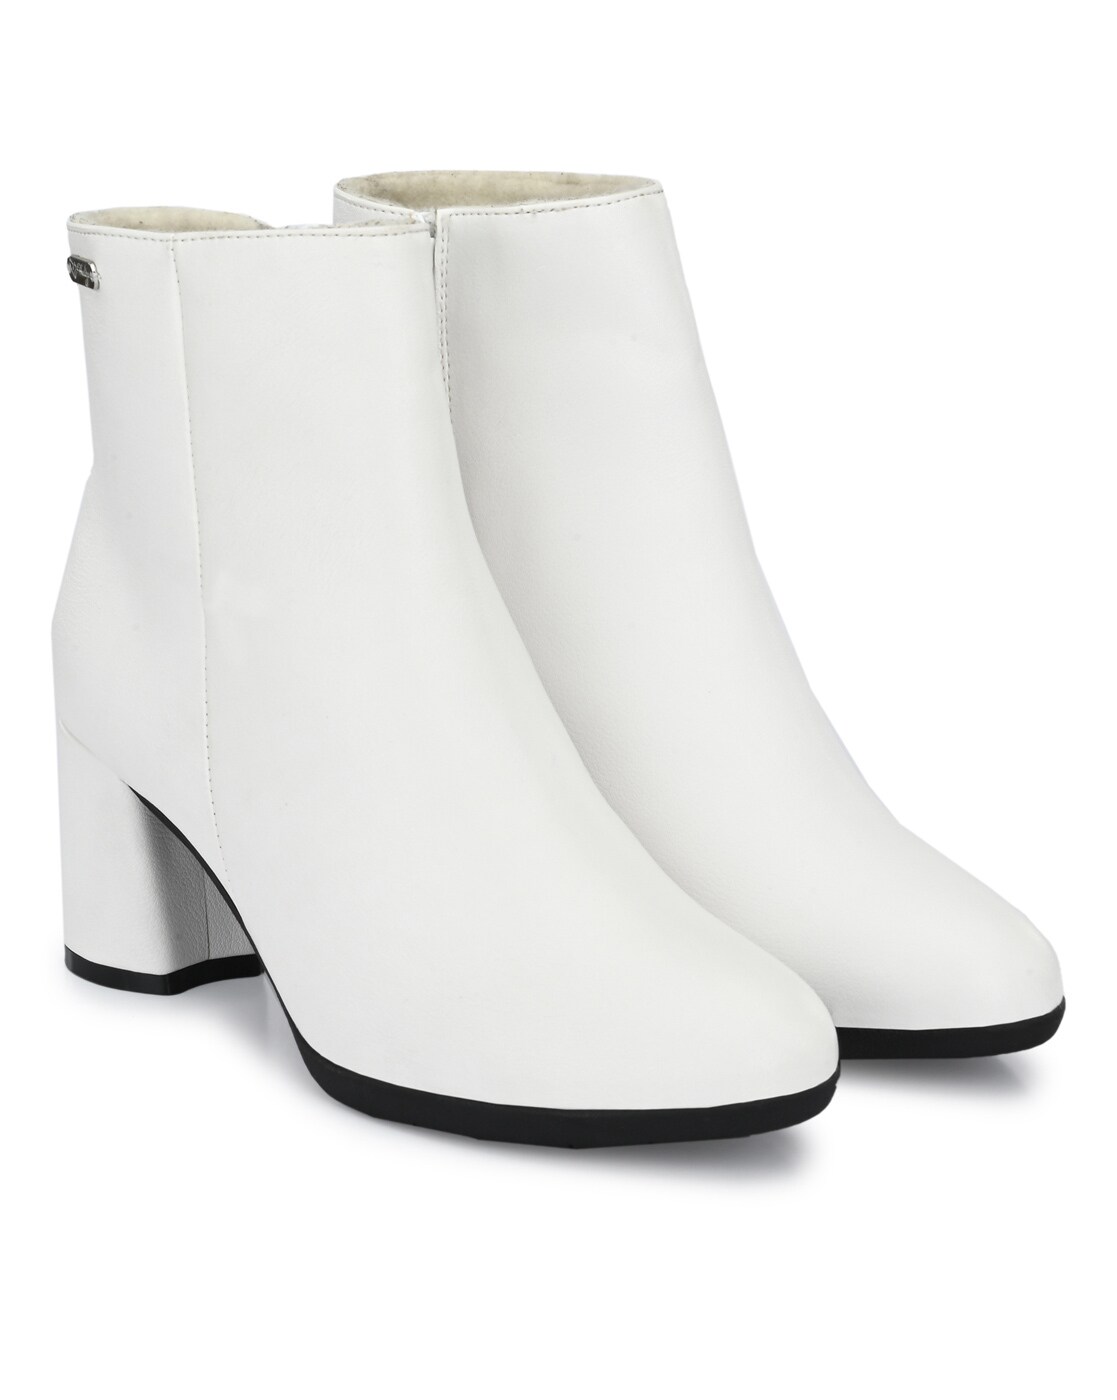 Square Toe Boots - Ankle Boots - Platform Boots - White Boots - Lulus